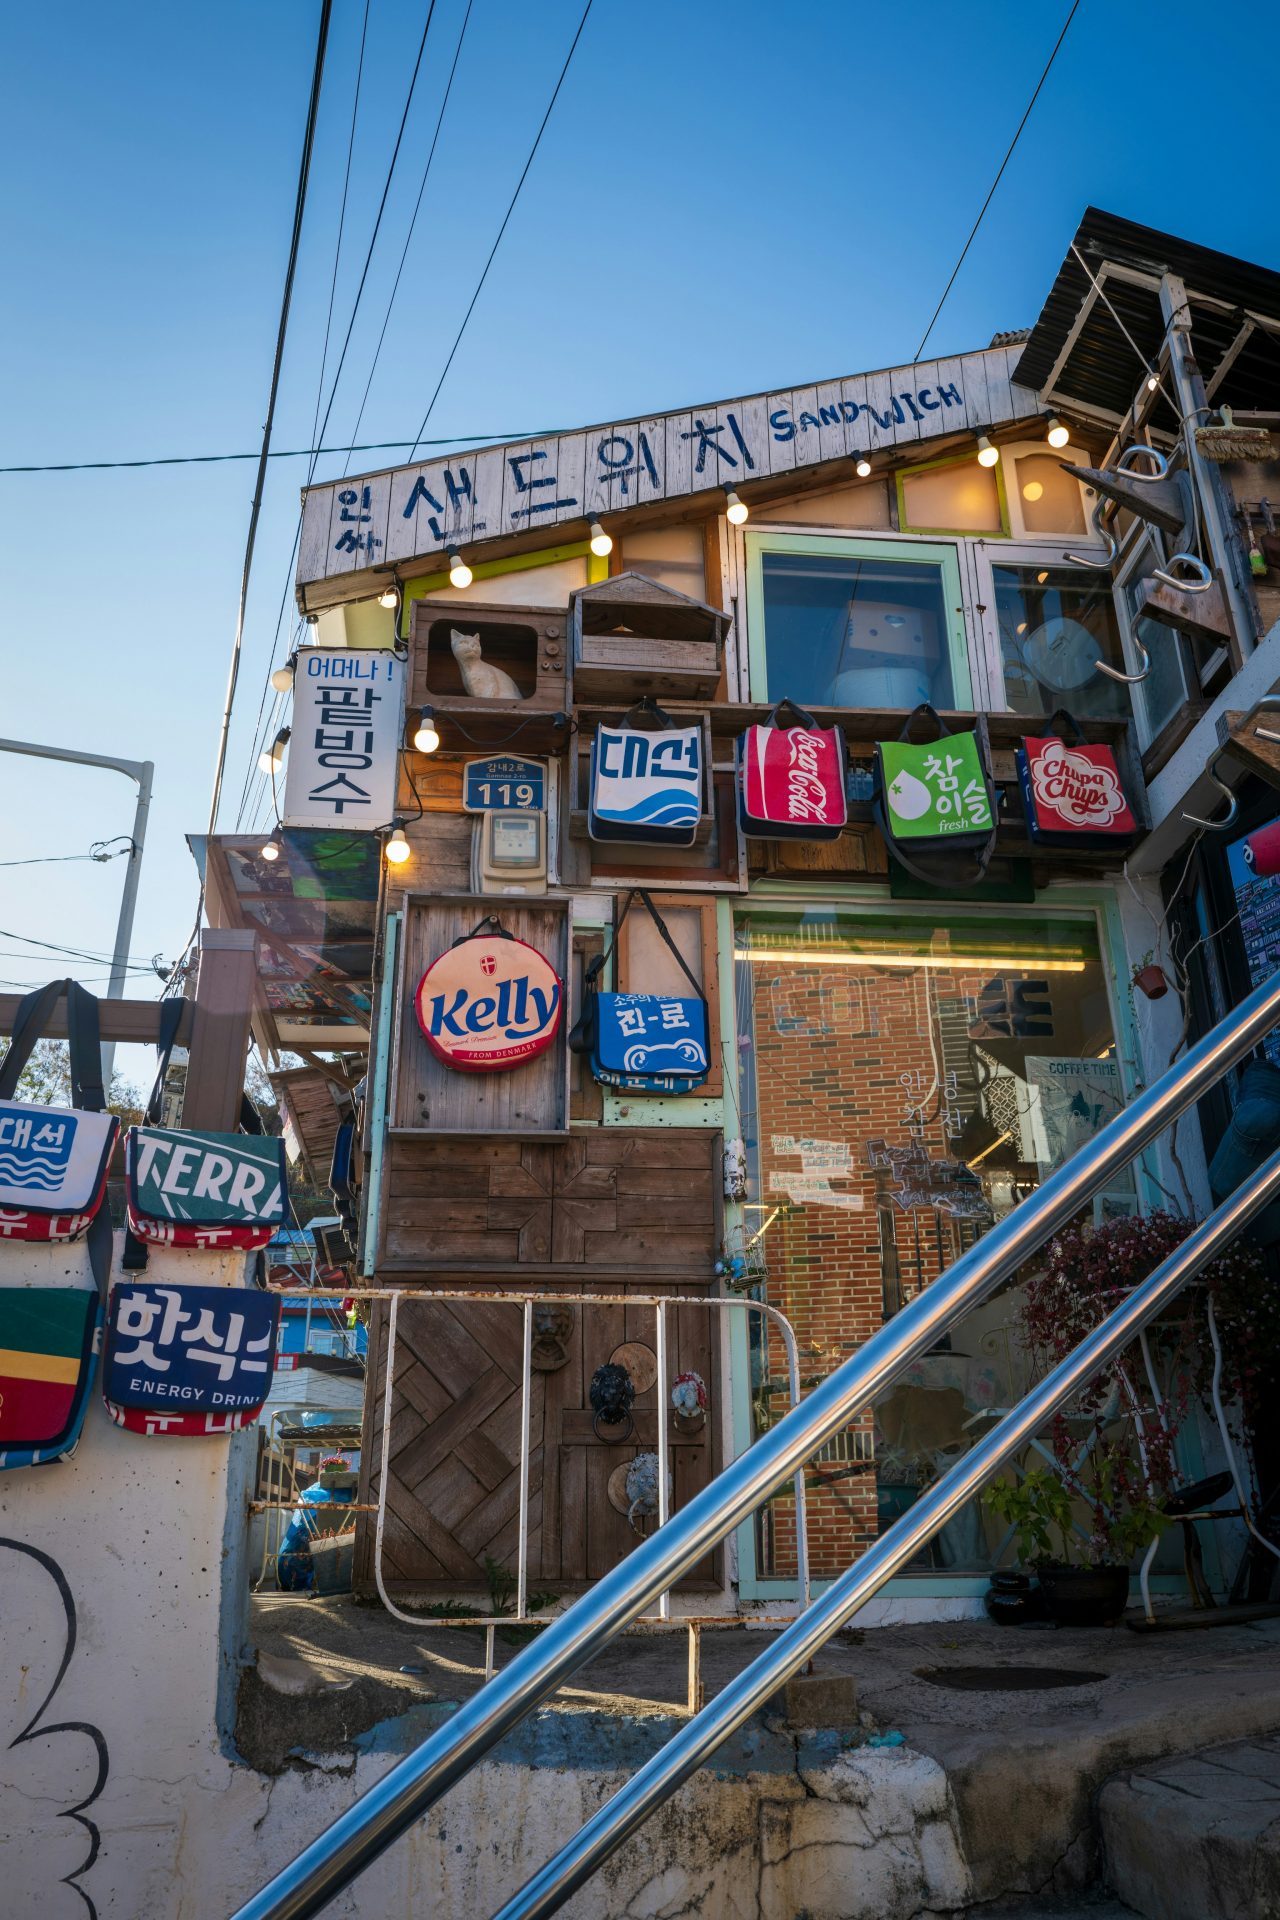 <p>Gamcheon Culture Village, with its colorful houses lined up on a slope, has become popular as an Instagram spot in recent years.</p> <p>Image: Sung Jin Cho / Unsplash</p>